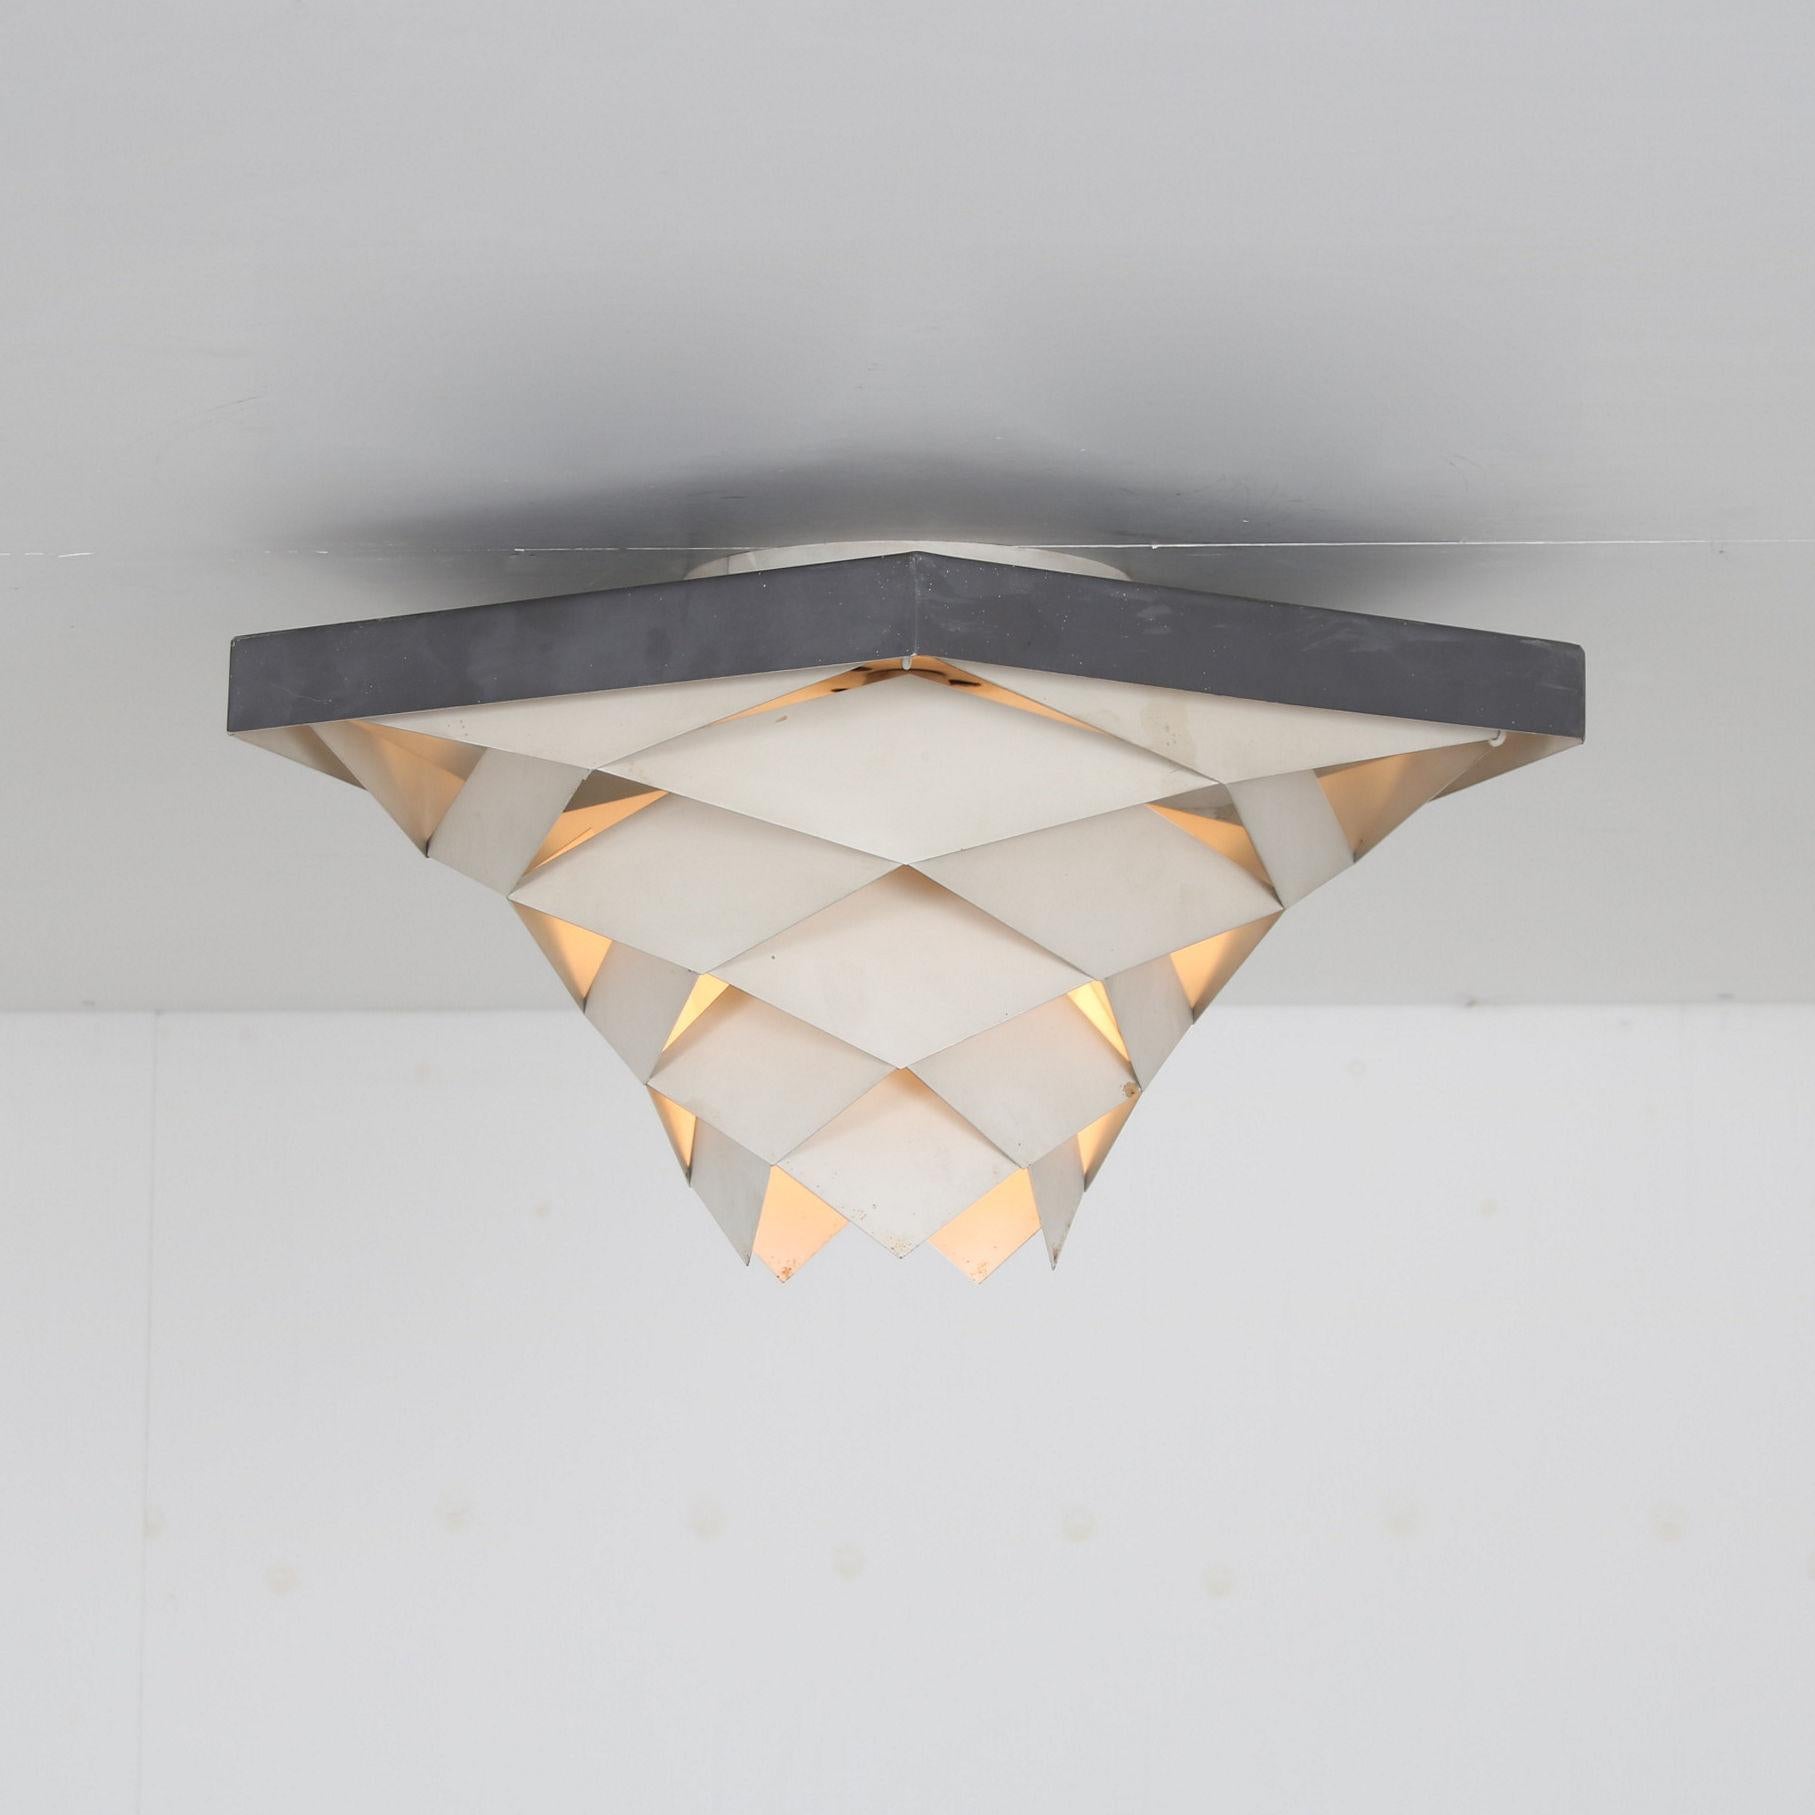 “Sympfoni” Ceiling Lamp by Preben Dahl for Hans Folsgaard, Denmark 1960 In Good Condition For Sale In Amsterdam, NL